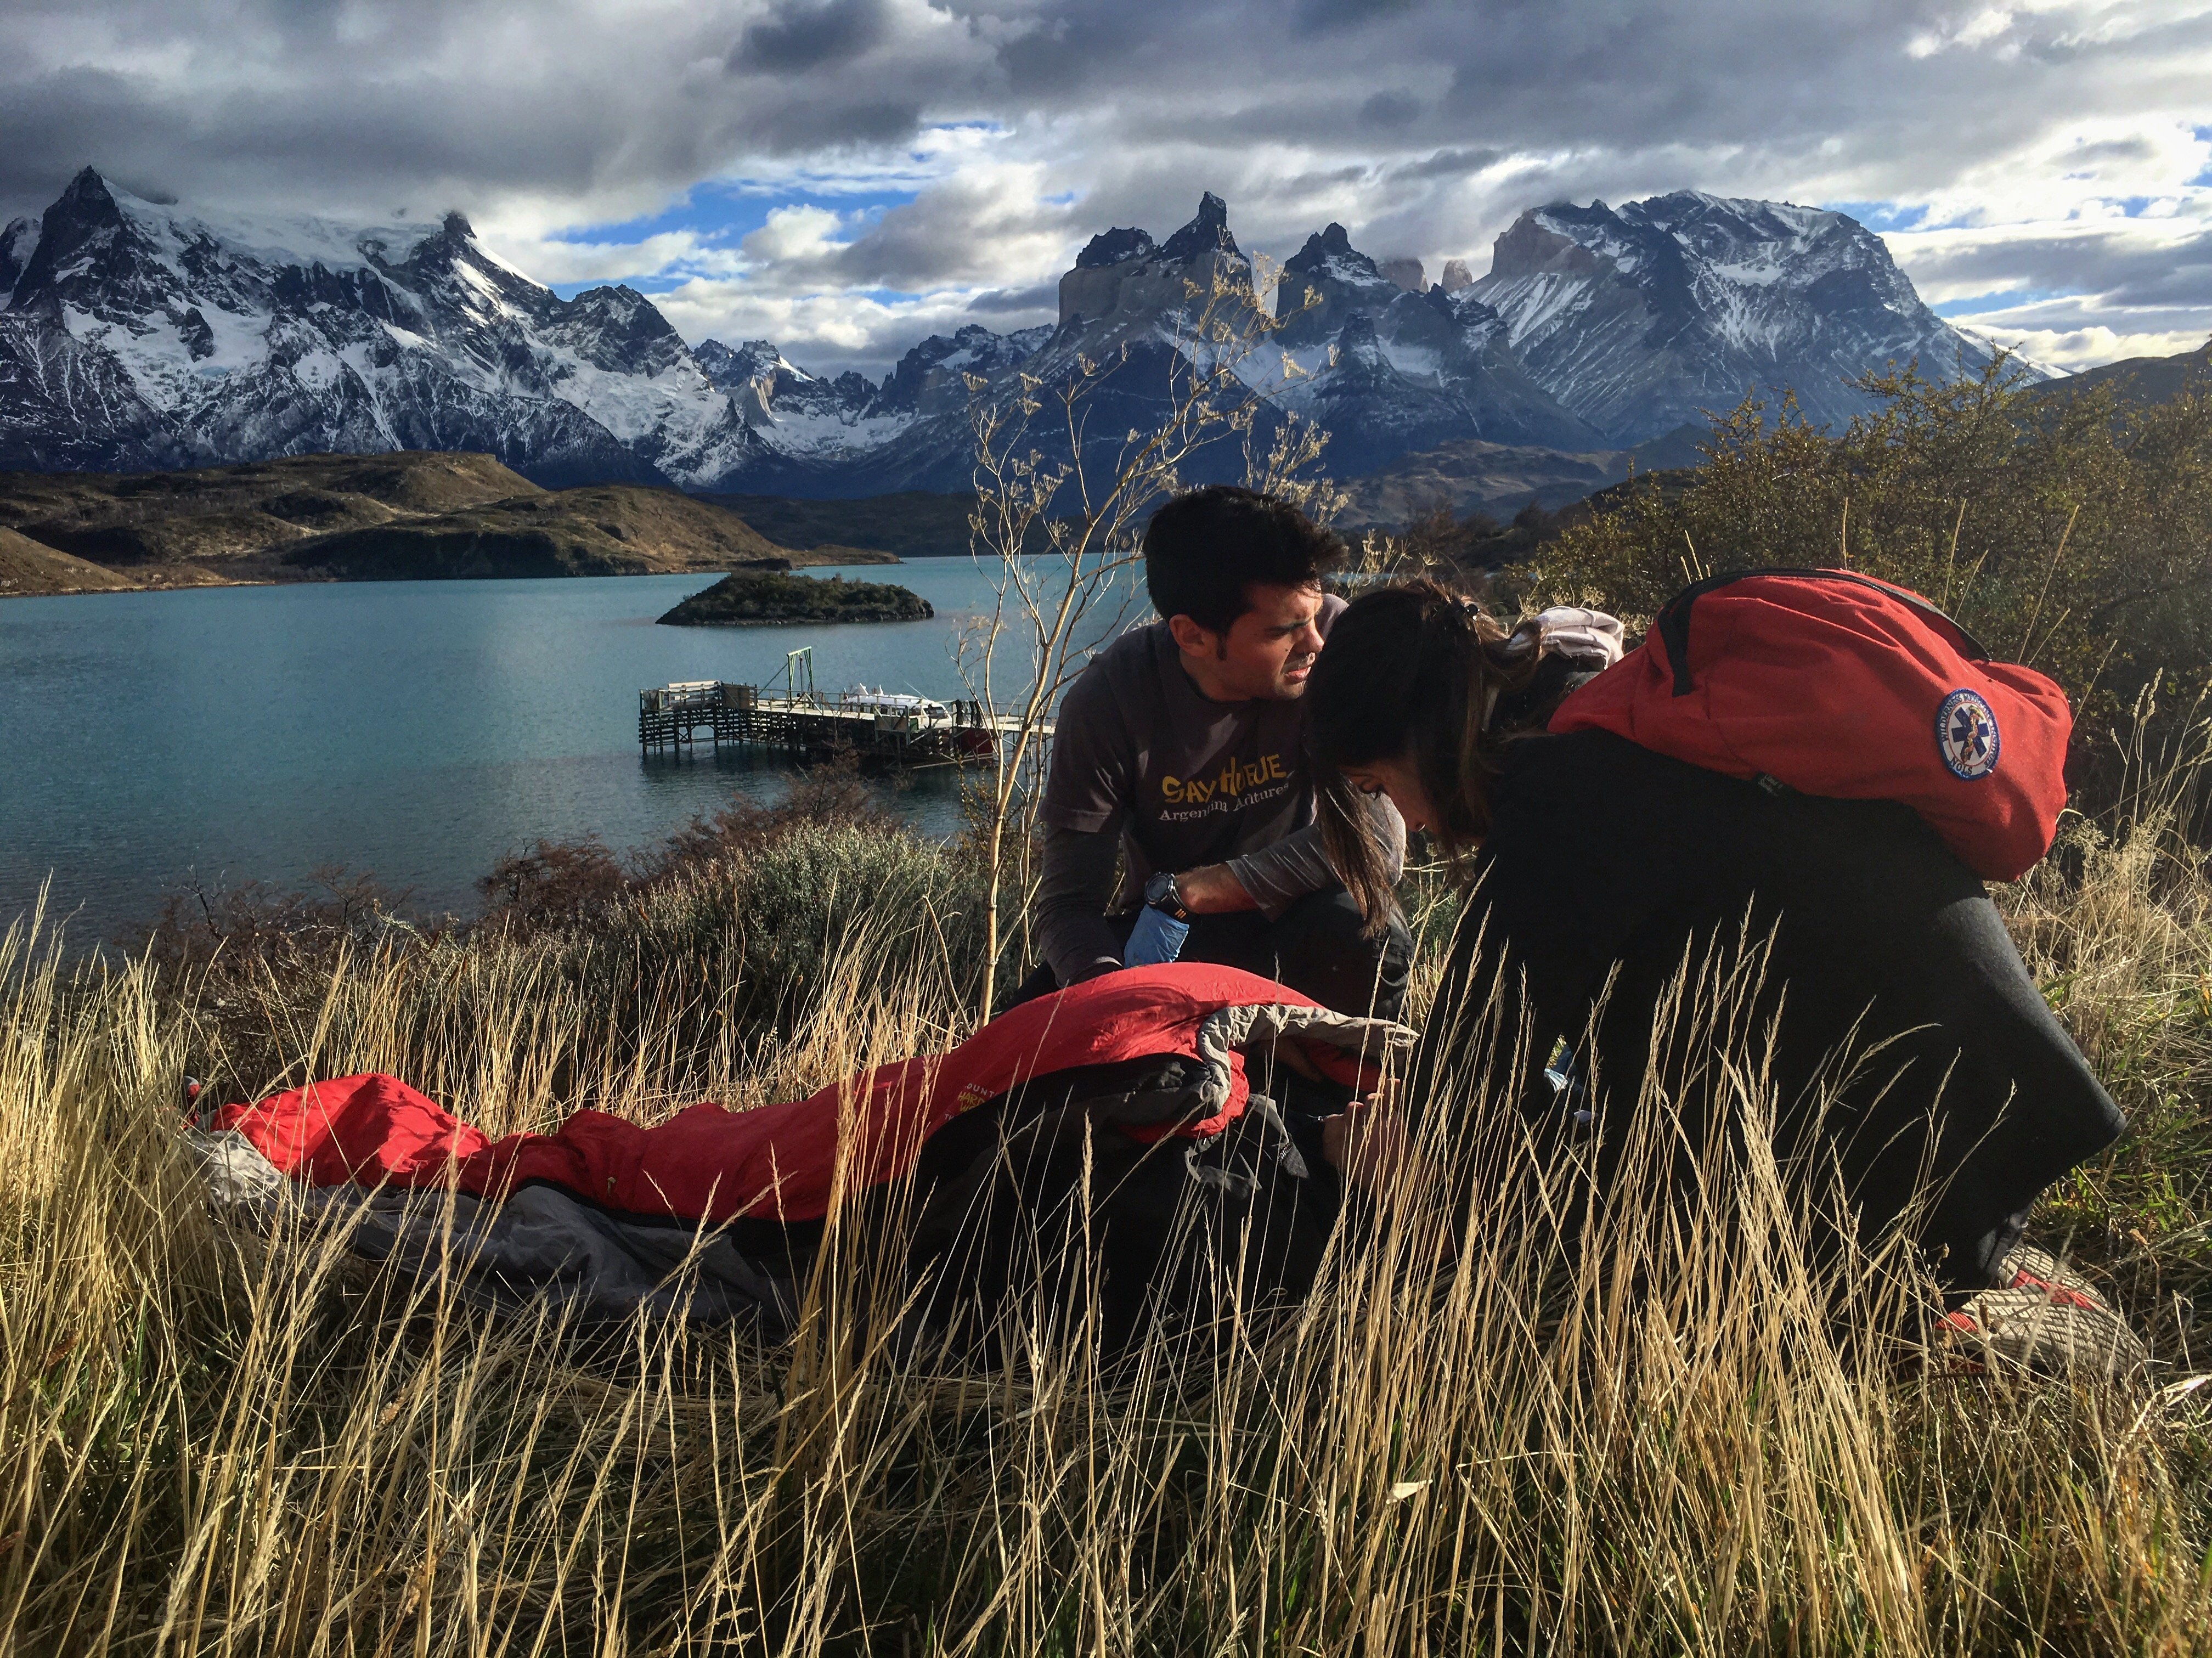 Man and man with backpack practice giving patient care with Torres del Paine mountains in Chile in the backgroujd